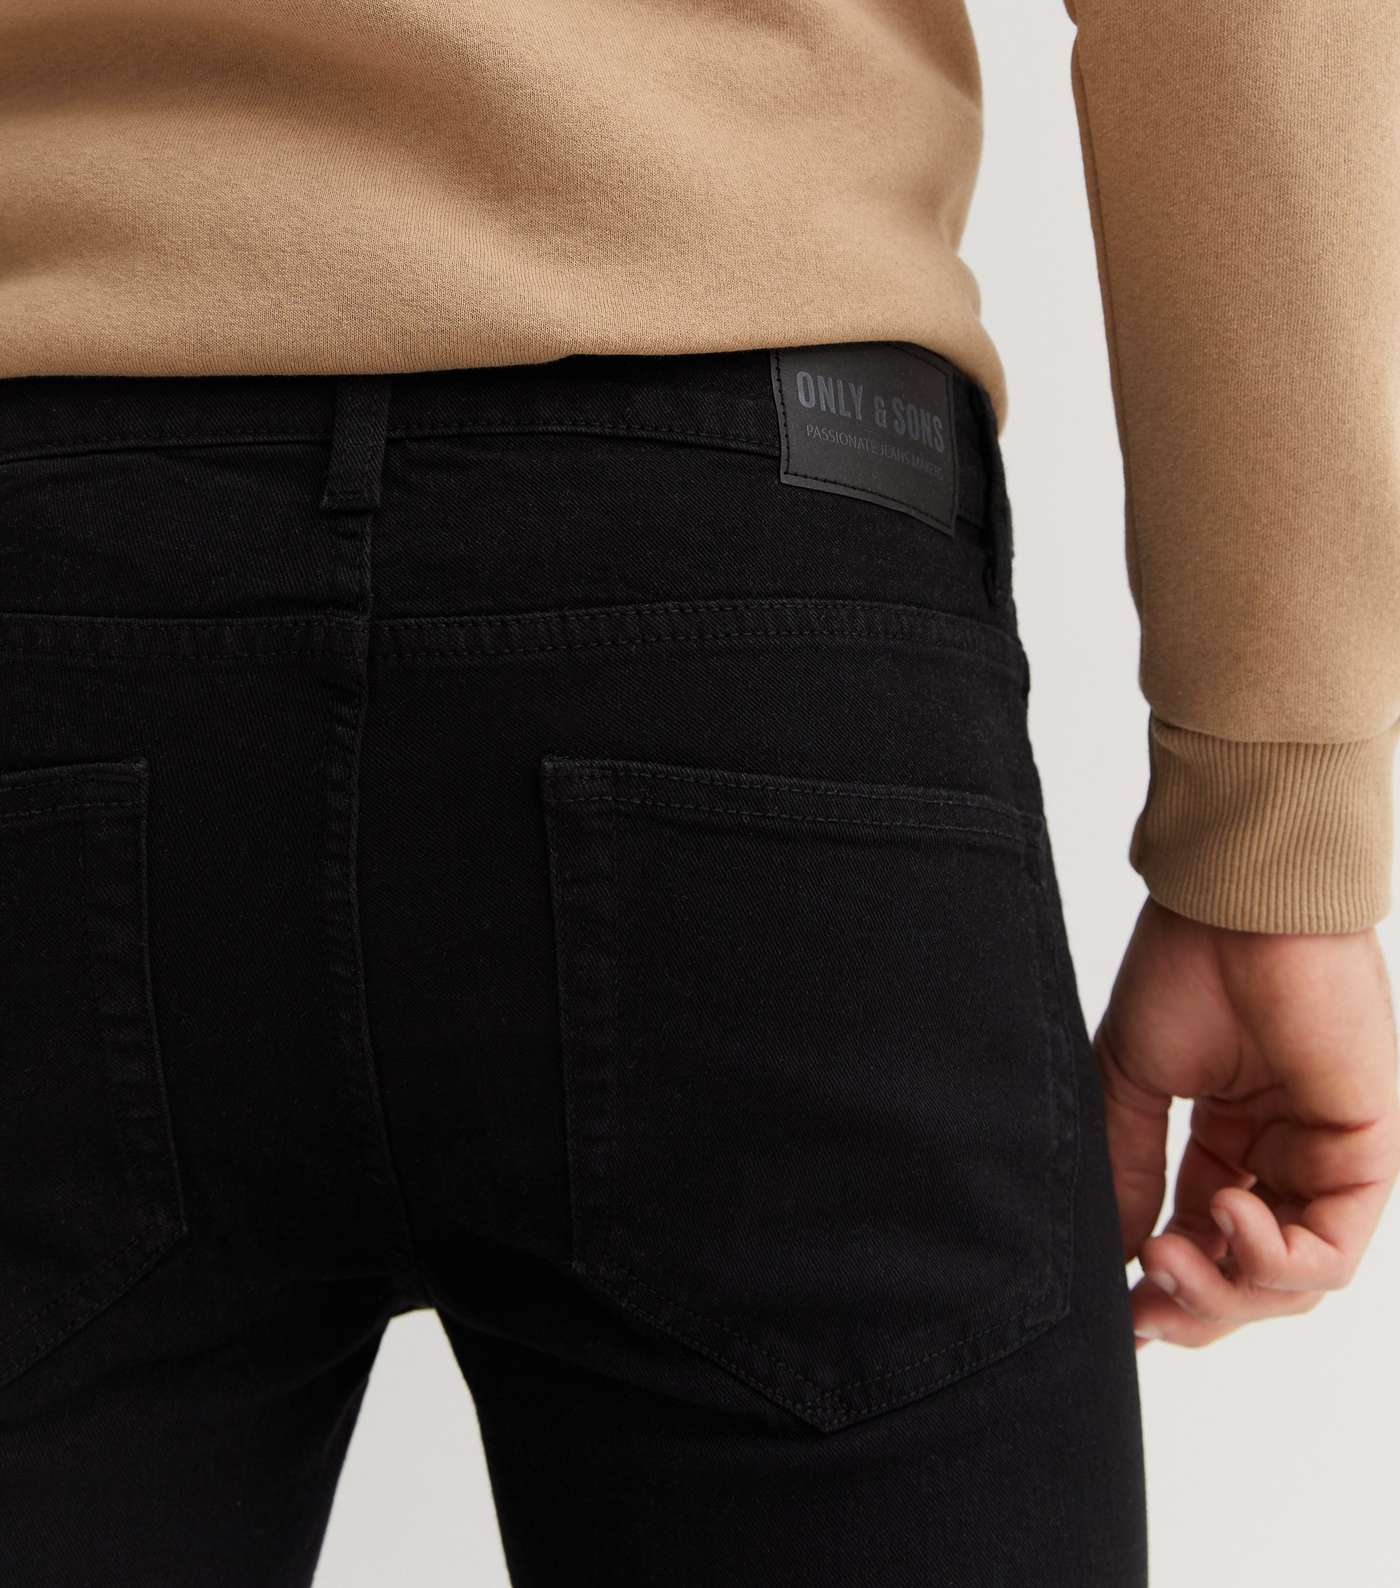 Only & Sons Black Skinny Jeans Image 3